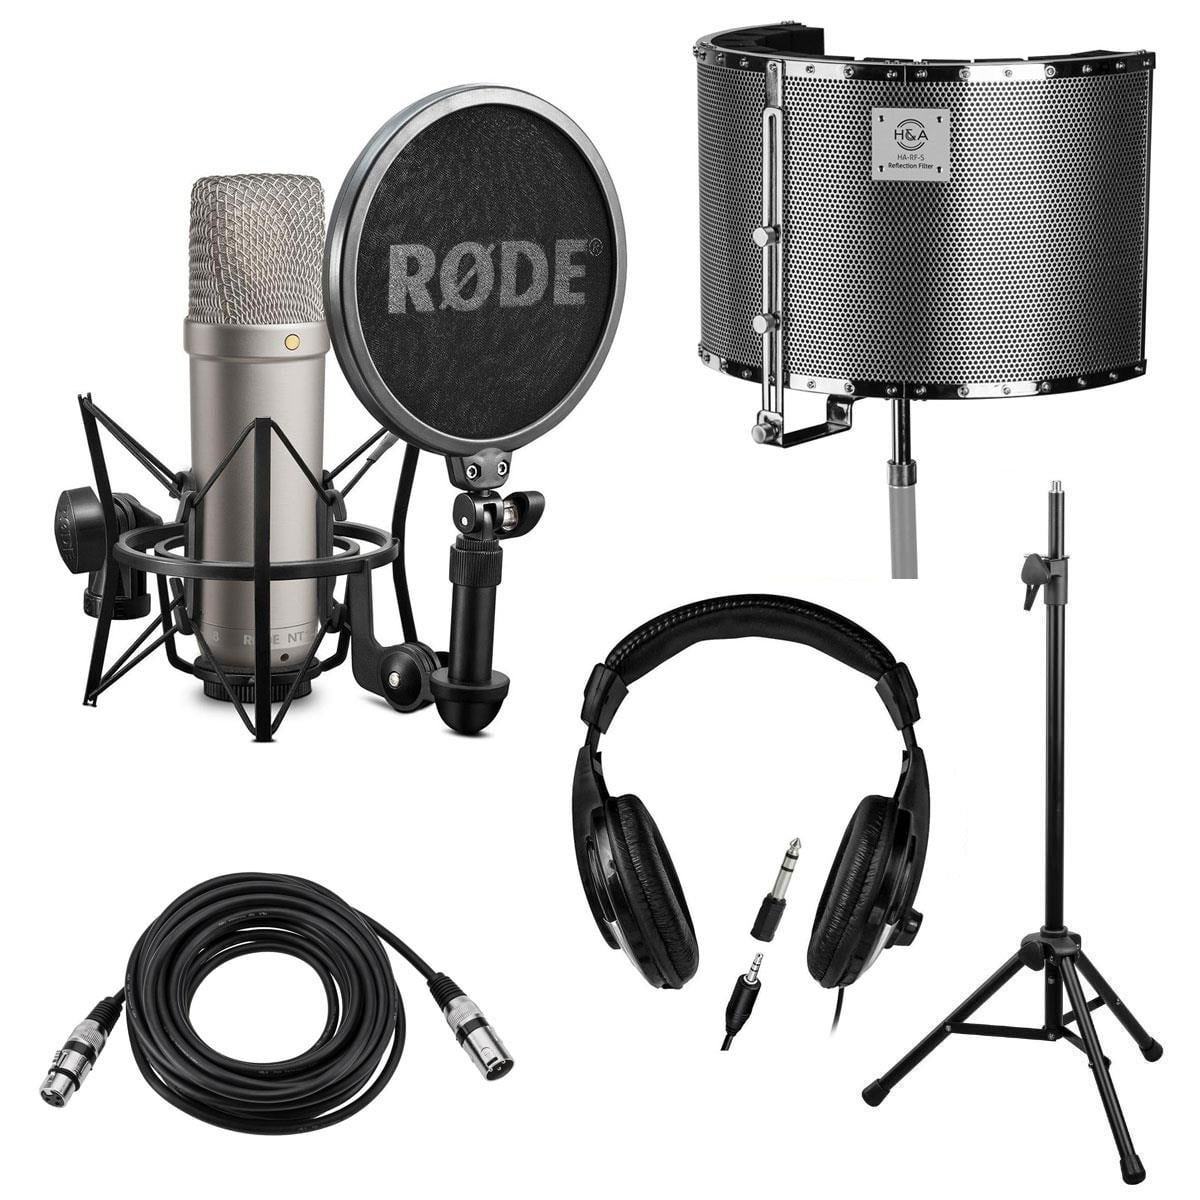 factor Torrent Infinity Rode NT1-A Cardioid Mic with Recording Setup Kit - Walmart.com